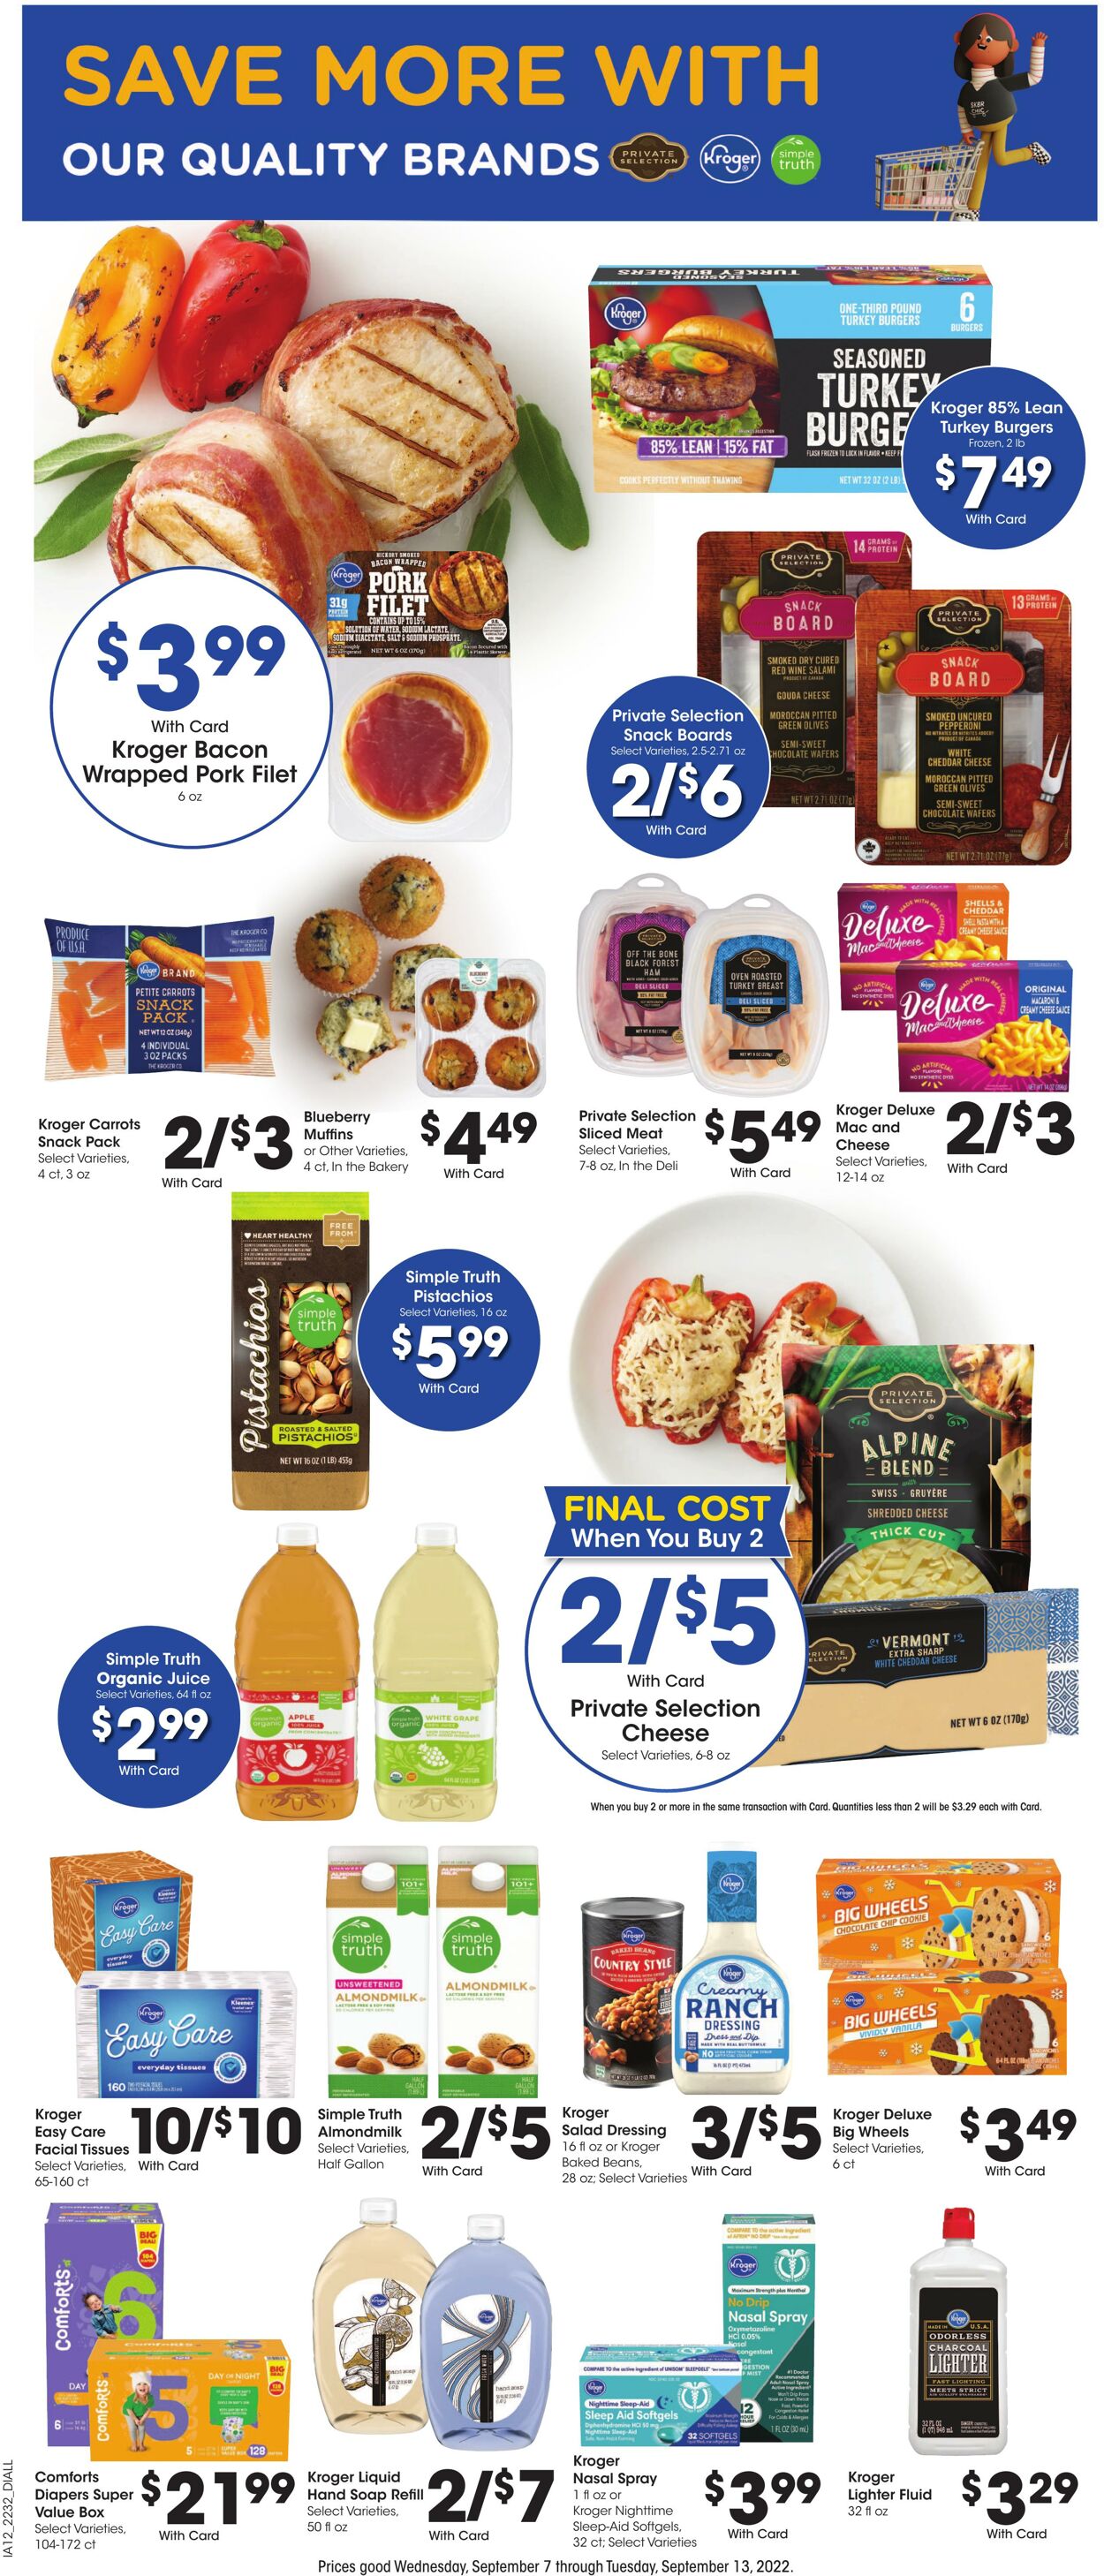 Weekly ad Baker's 09/07/2022 - 09/13/2022